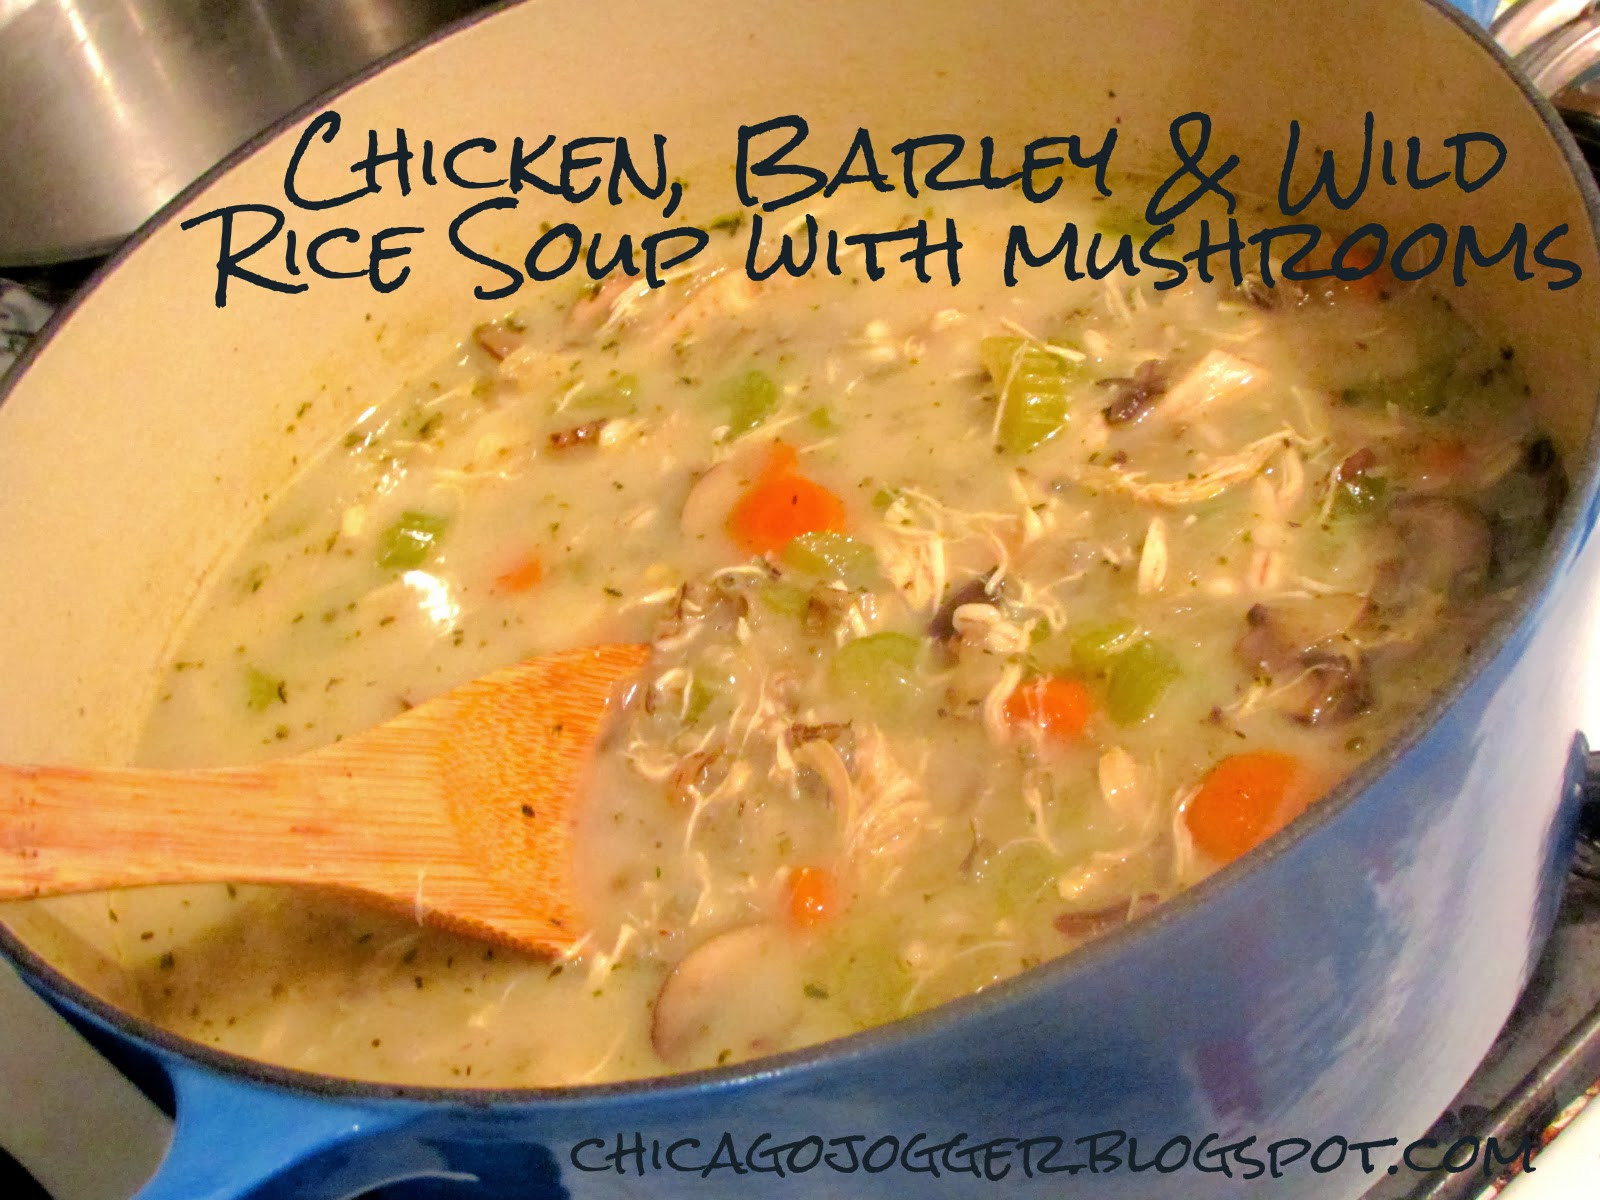 Chicken Wild Rice Mushroom Soup
 Chicago Jogger Chicken Barley & Wild Rice Soup with